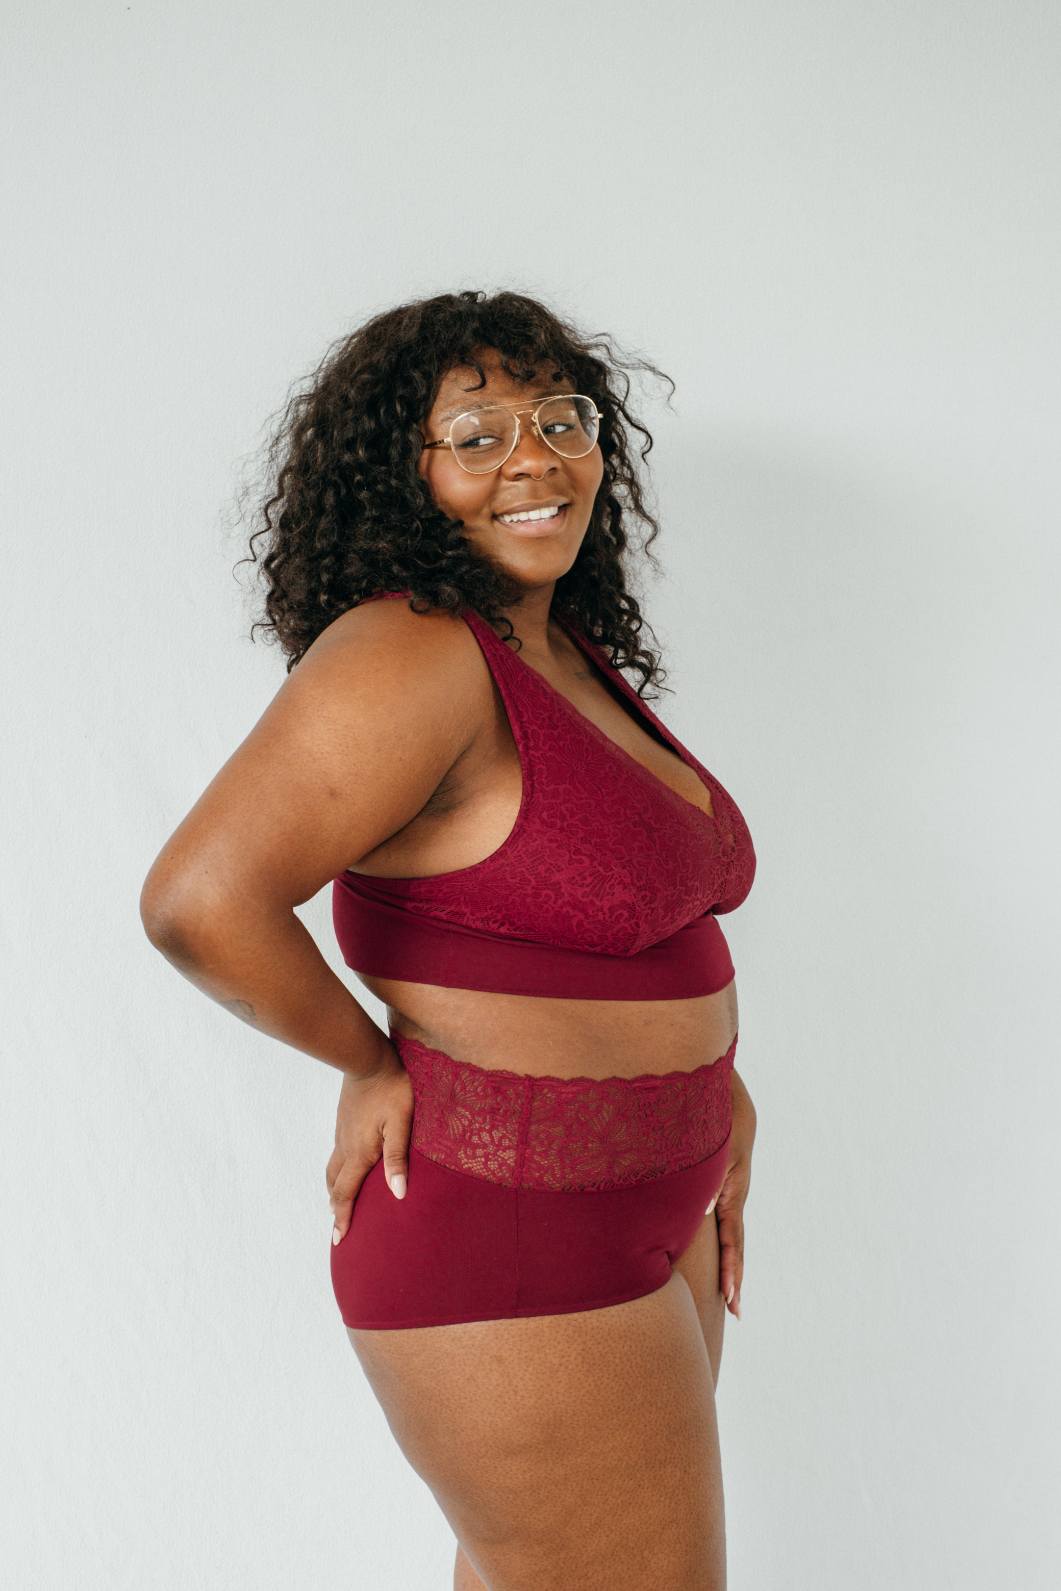 Bralette with good support and high-waist slip in dark red, photographed from the side.